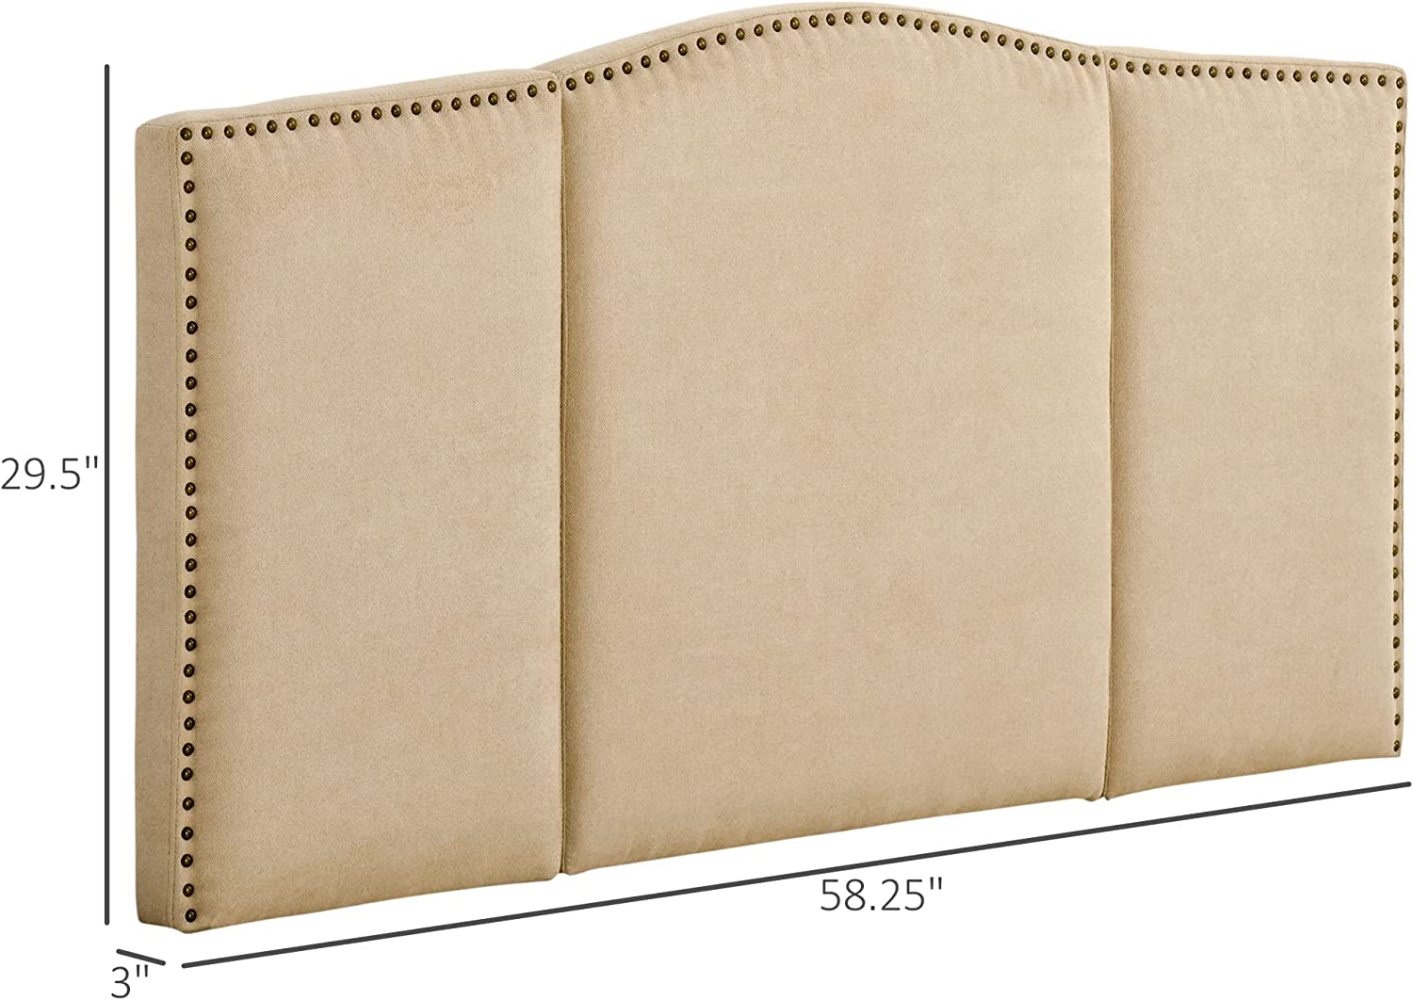 LueInJoy Upholstered Nailhead Trim Headboard Home Bedroom Decoration for Full and Queen-Sized Beds Beige - image 3 of 3